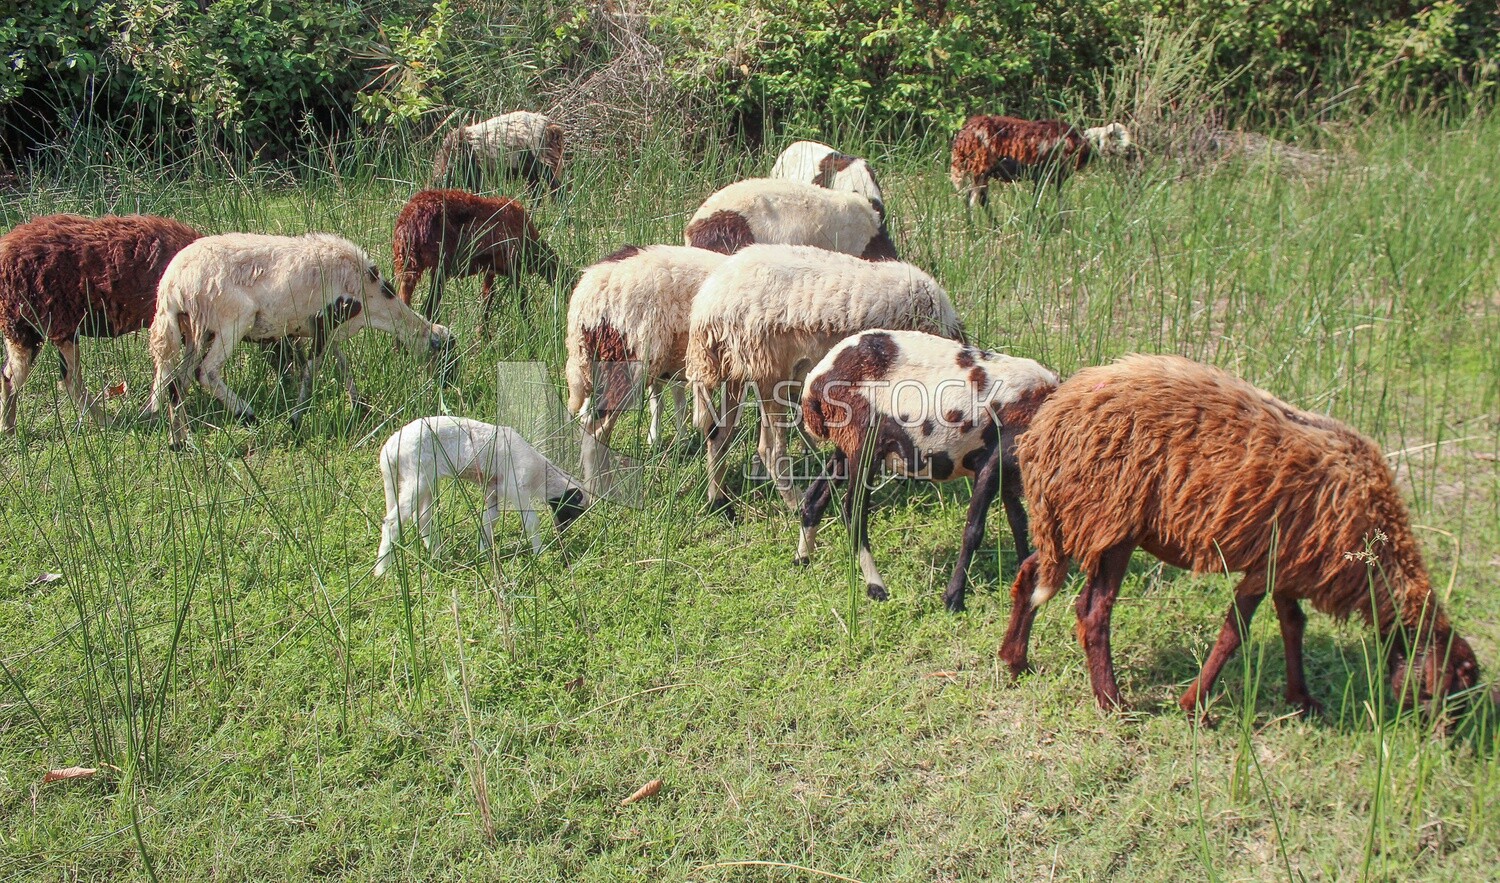 A scene of a group of sheep eating grass from the pasture